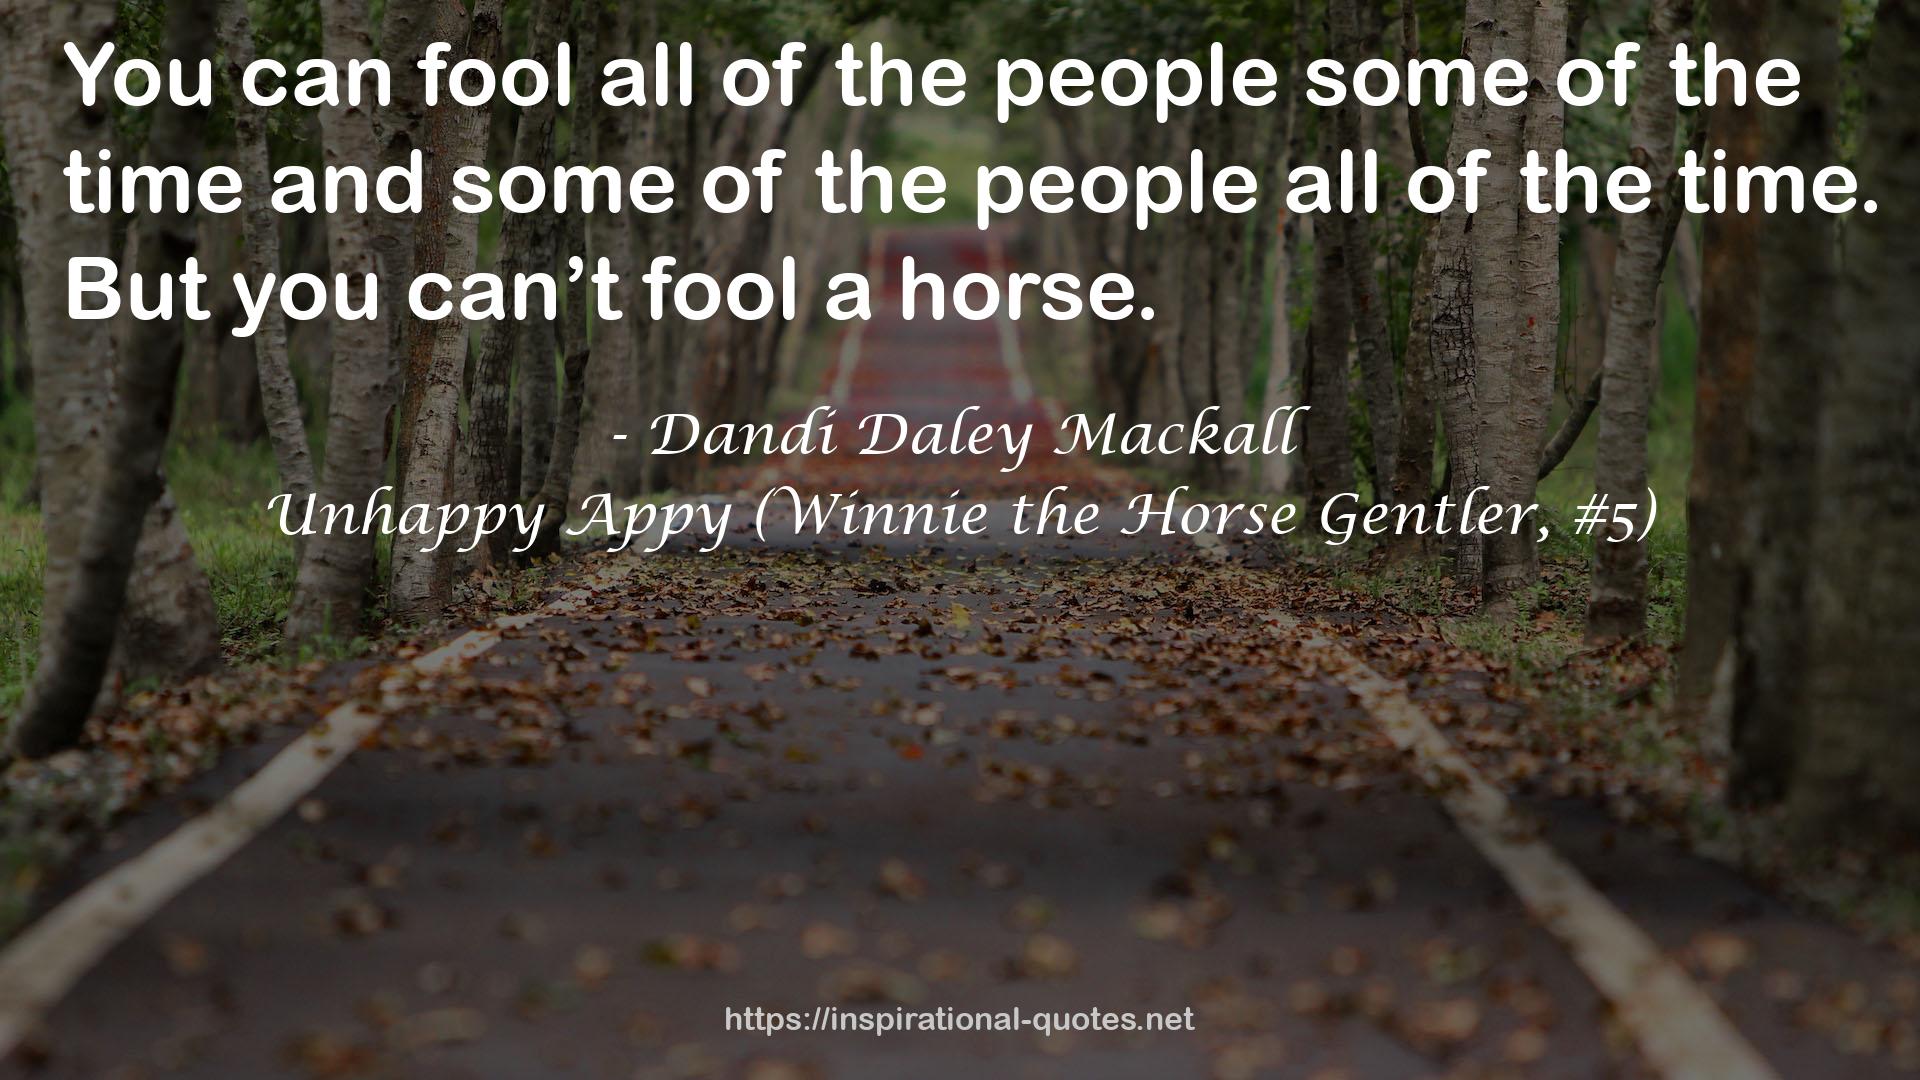 Unhappy Appy (Winnie the Horse Gentler, #5) QUOTES